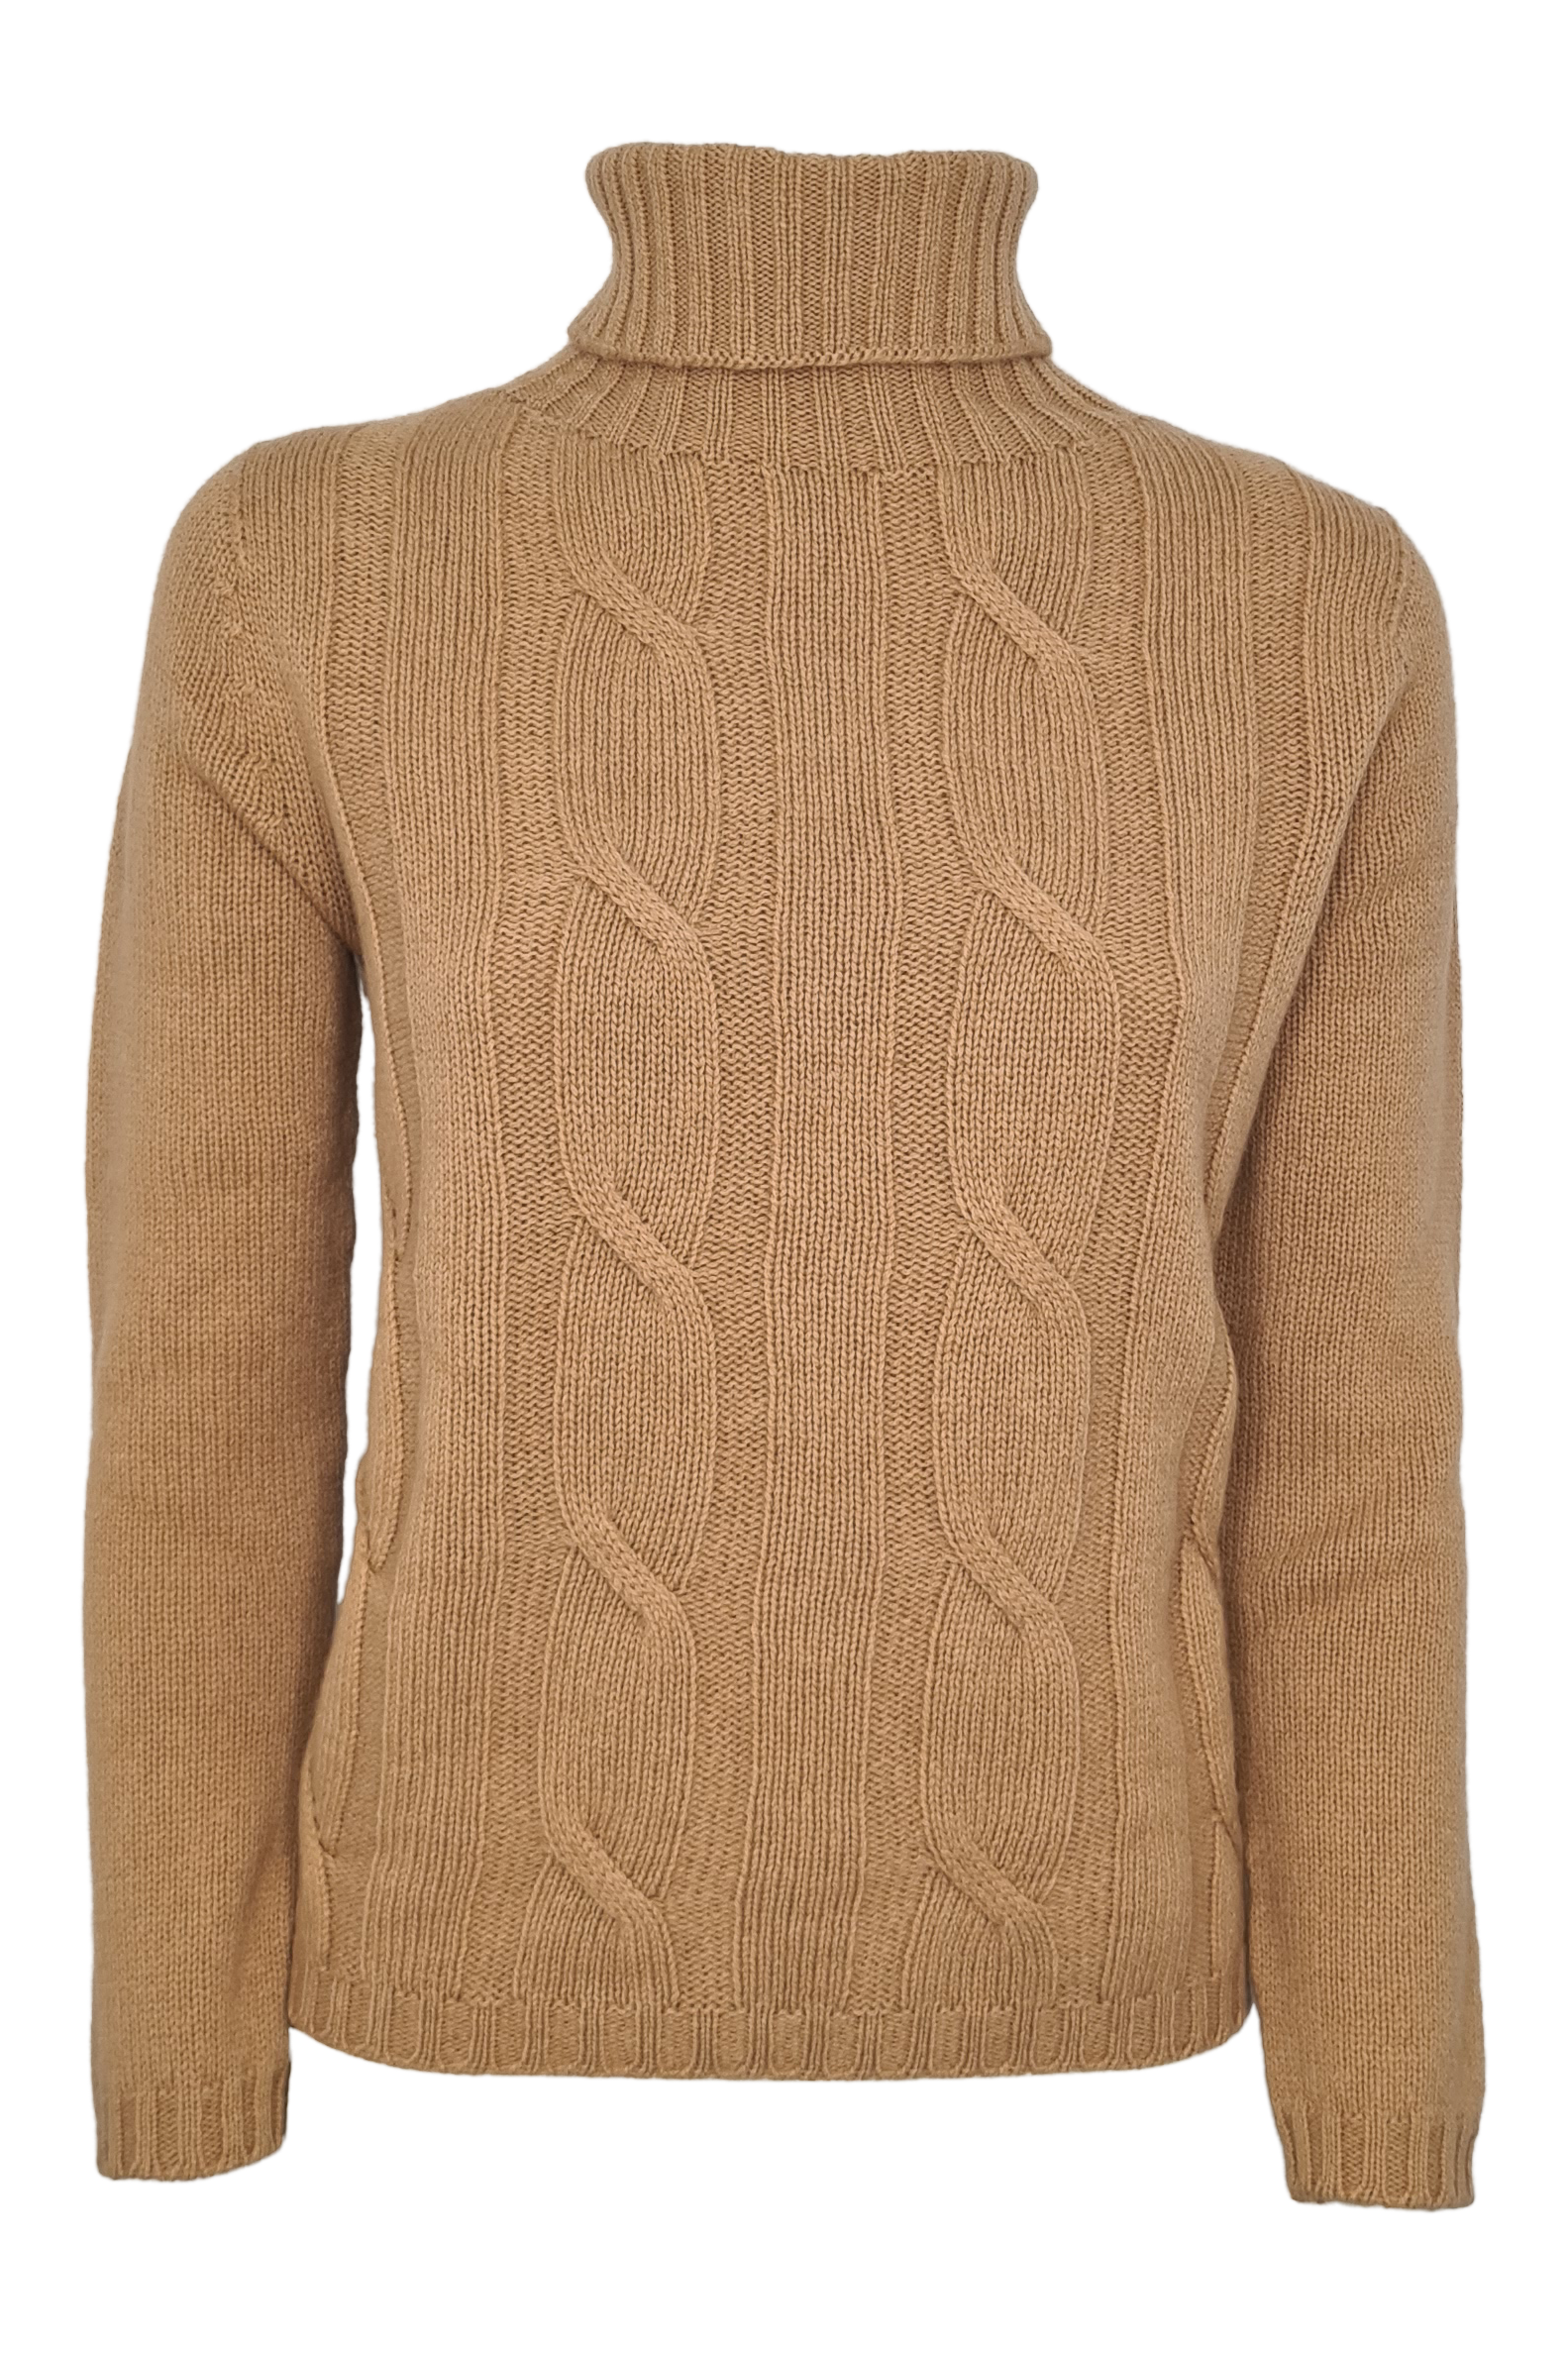 High Neck Sweater with Agata Aspen Cables